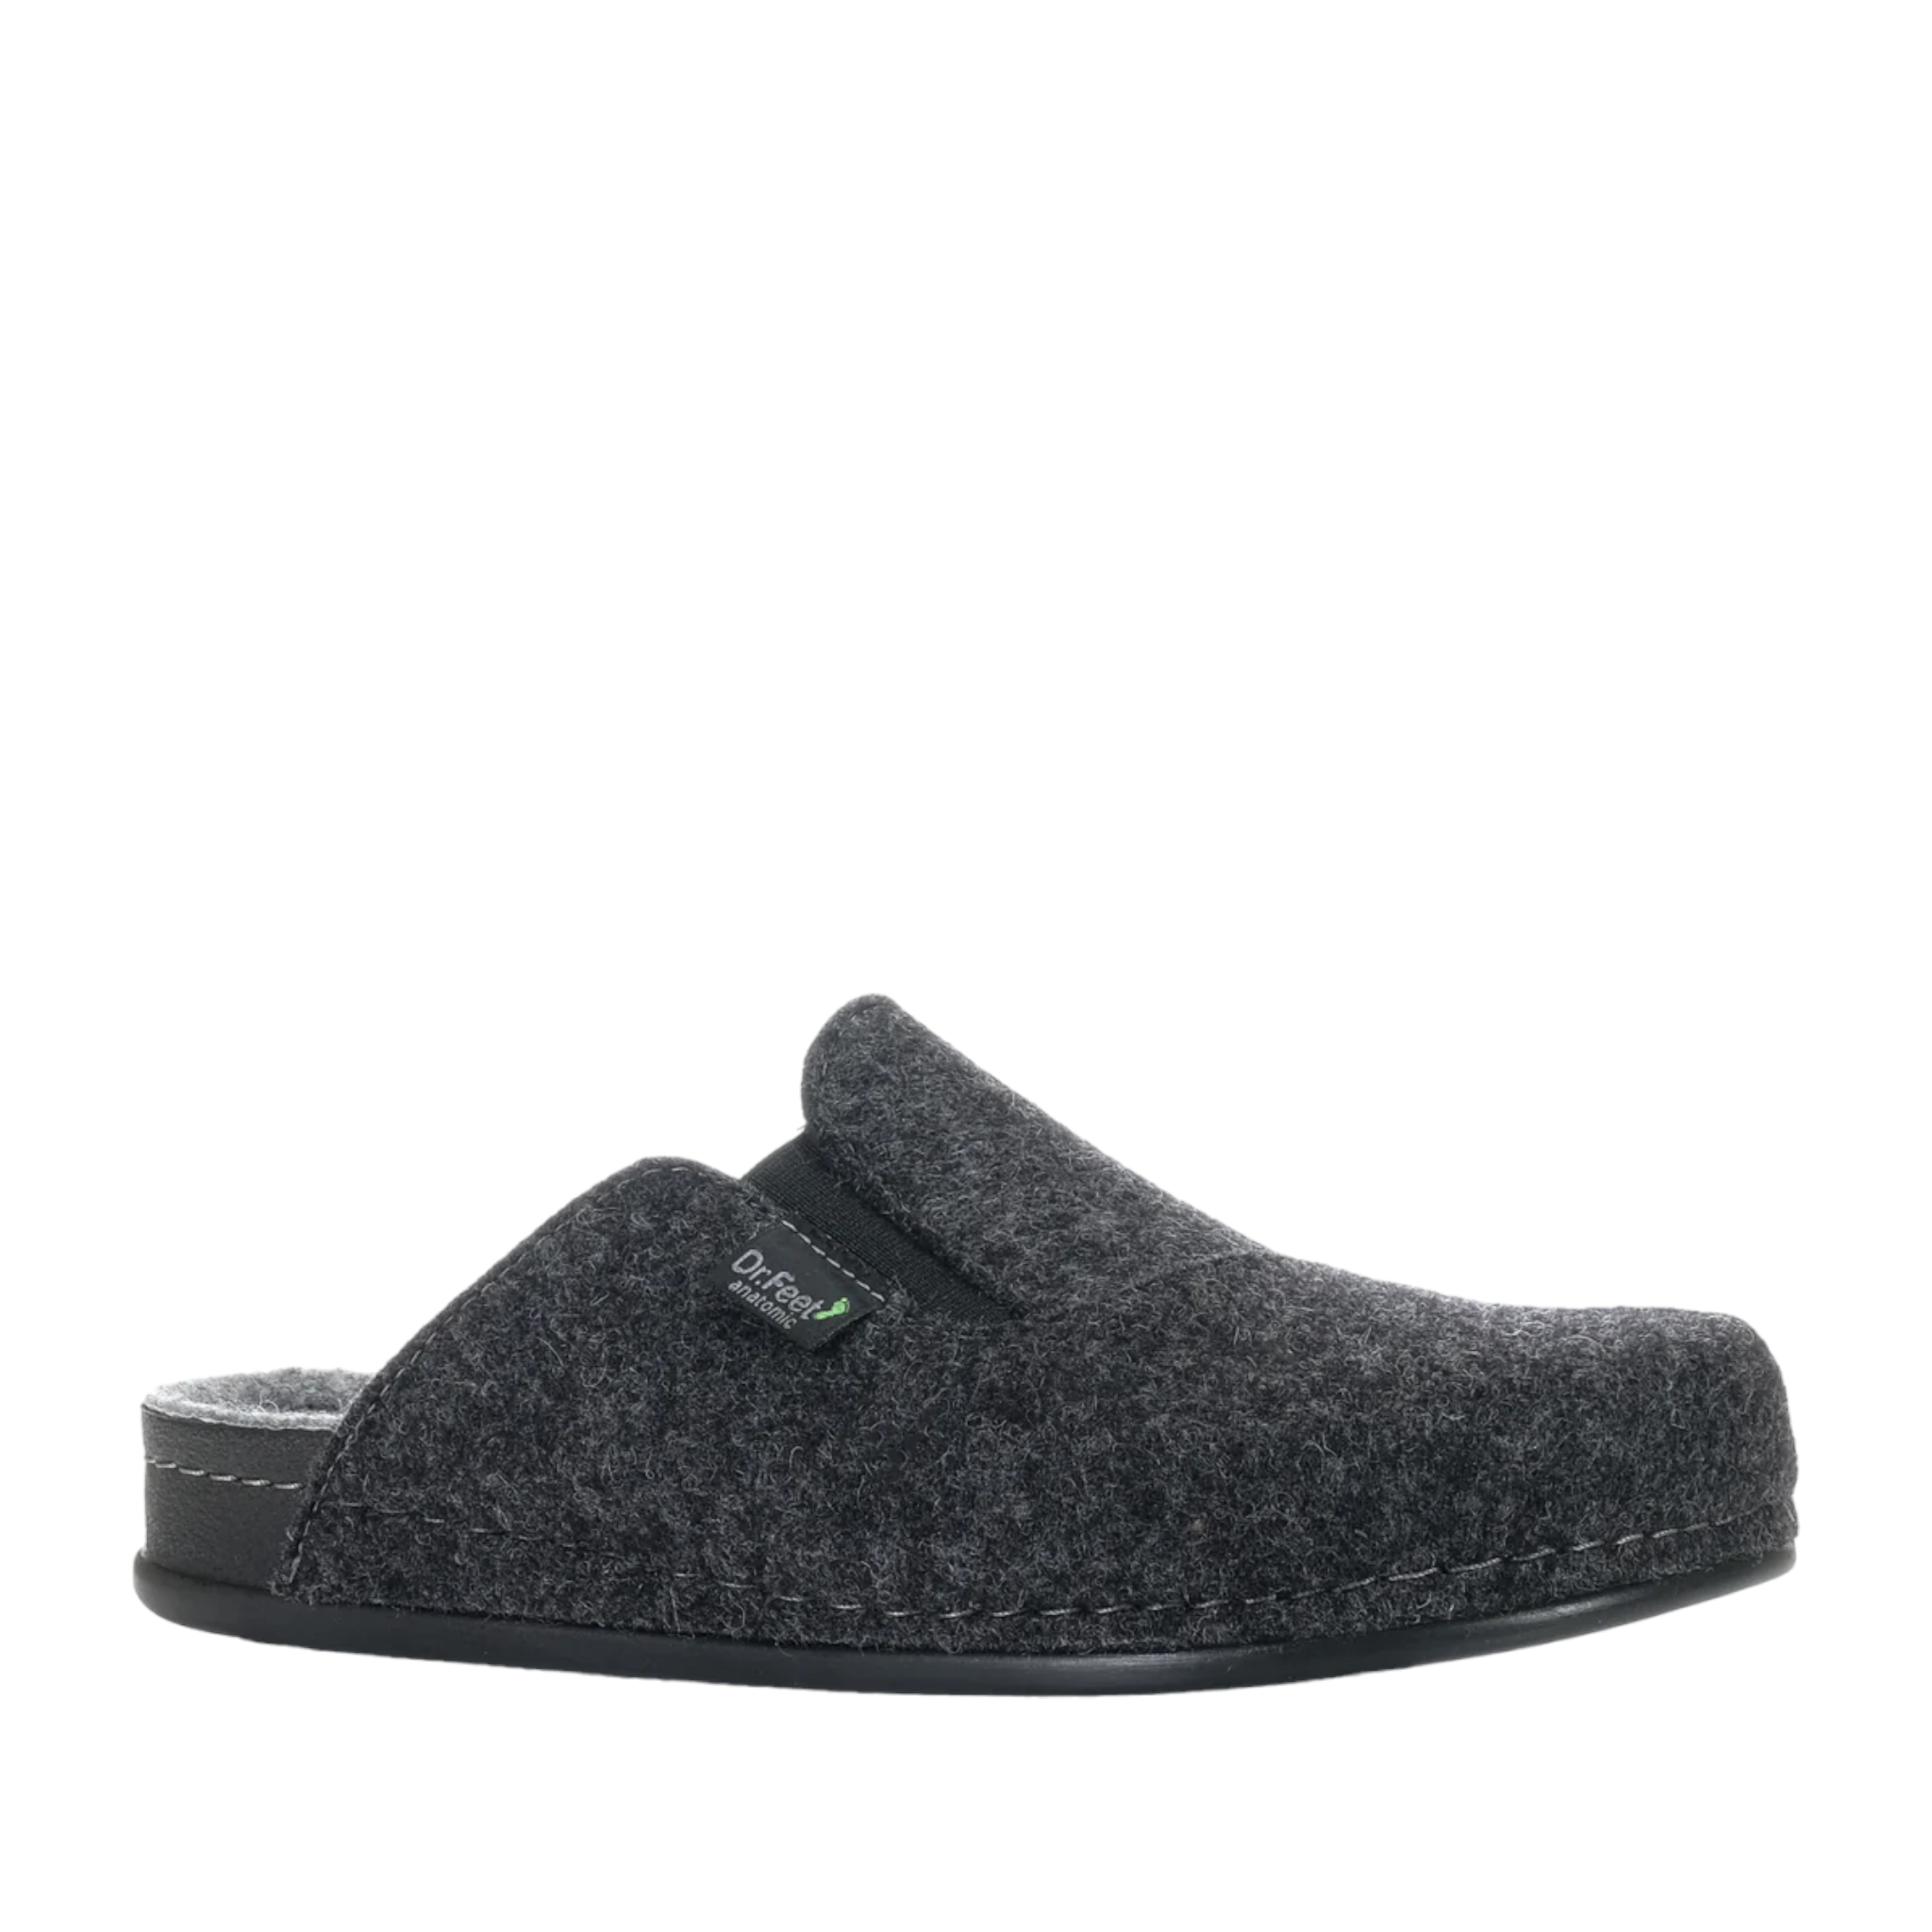 Shop Mens Felt Mule Slippers Online and In-store. Dark Grey felt with light grey inner sole. Slight Gusset on out side of upper. Shop Online and In-Store with shoe&amp;me